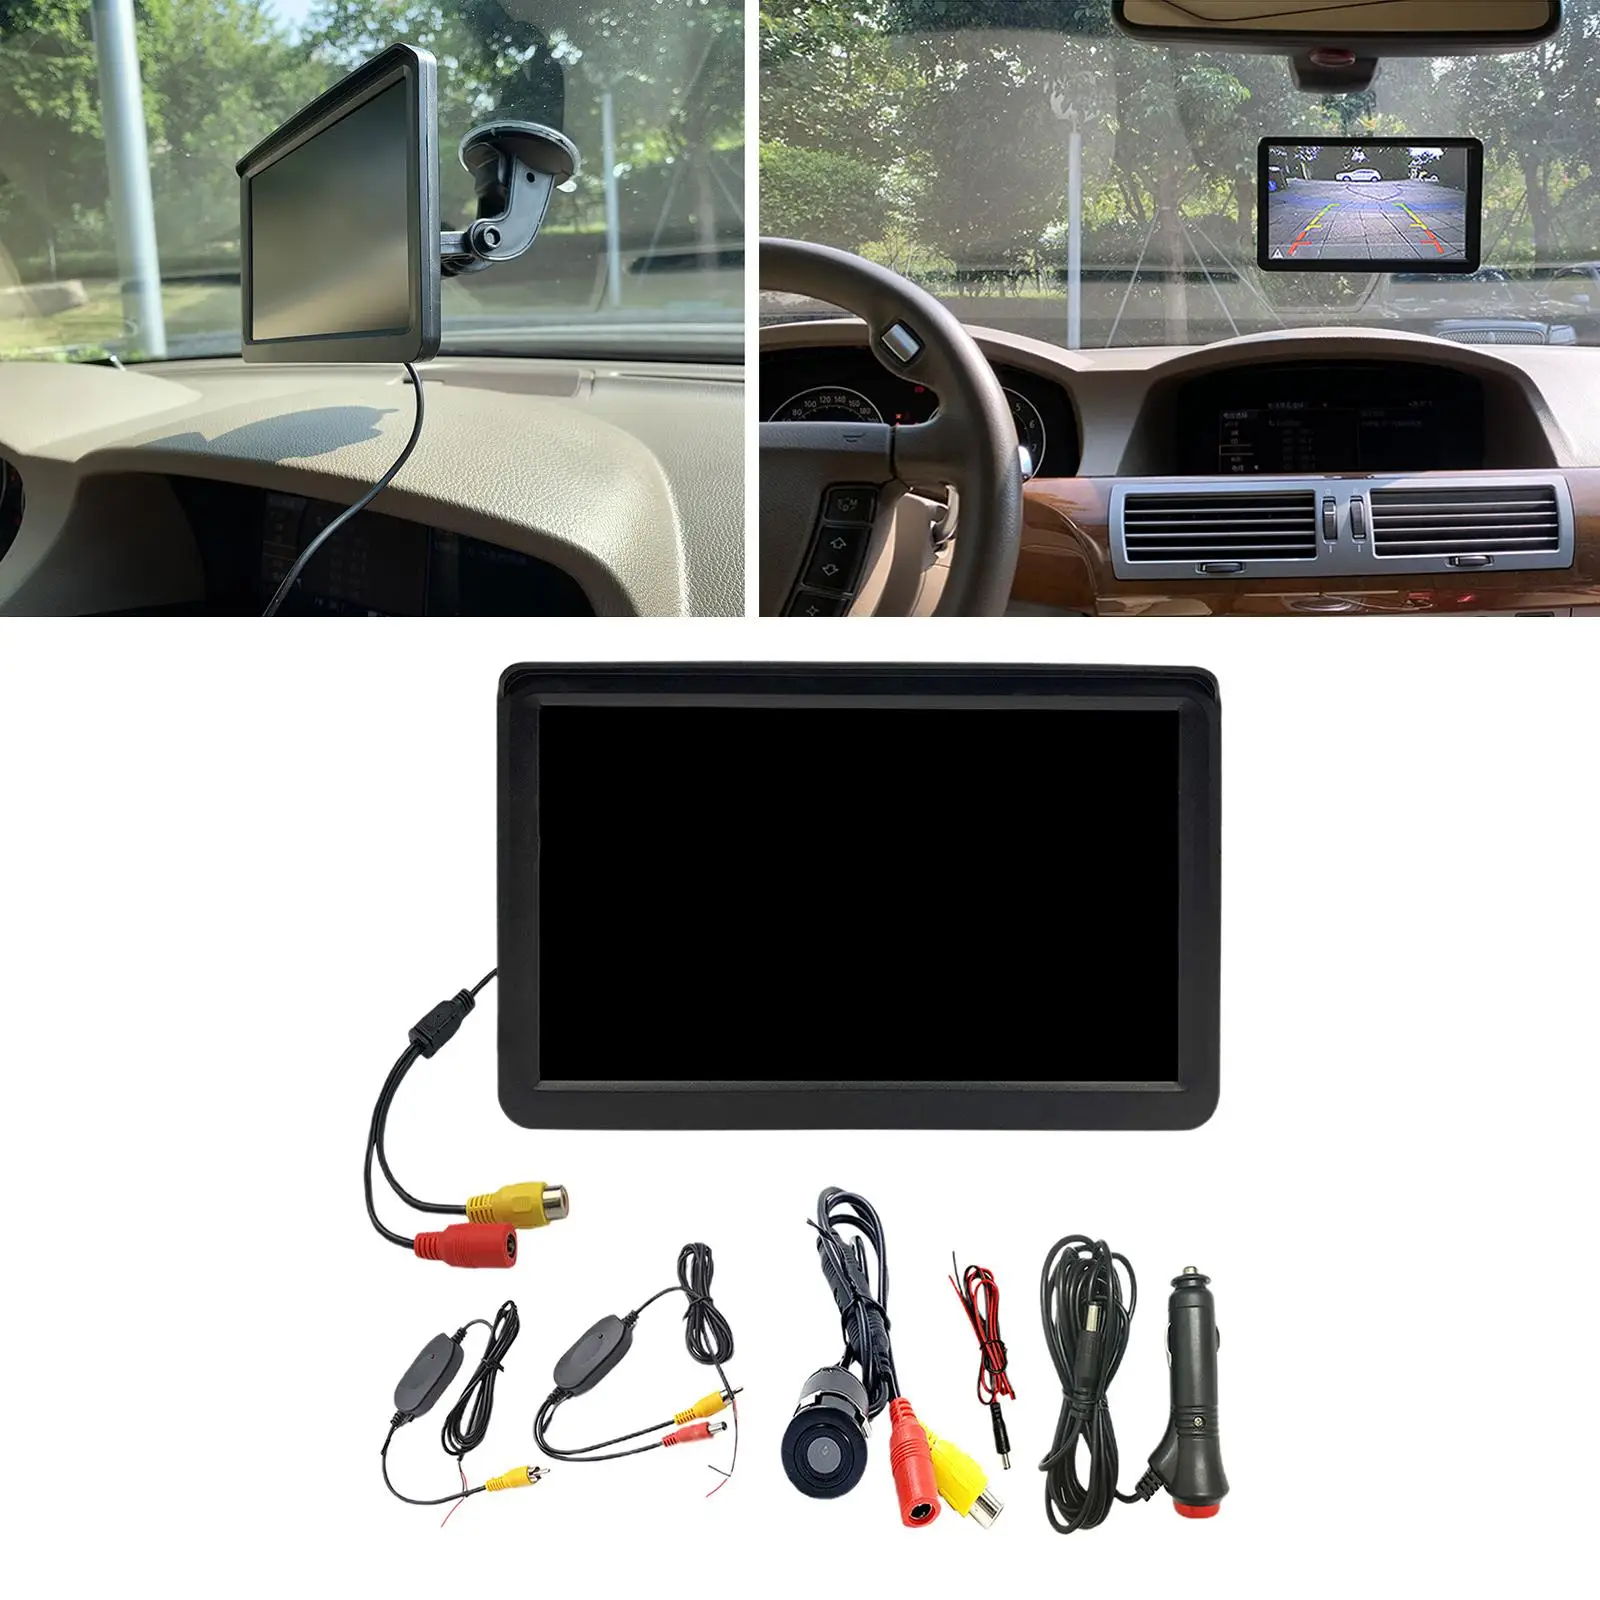 7 in Rear  LCD Monitor   Receiver Trainsmitter 12 Camera, Park Assist, 170° Wide Angle, Scale Lines